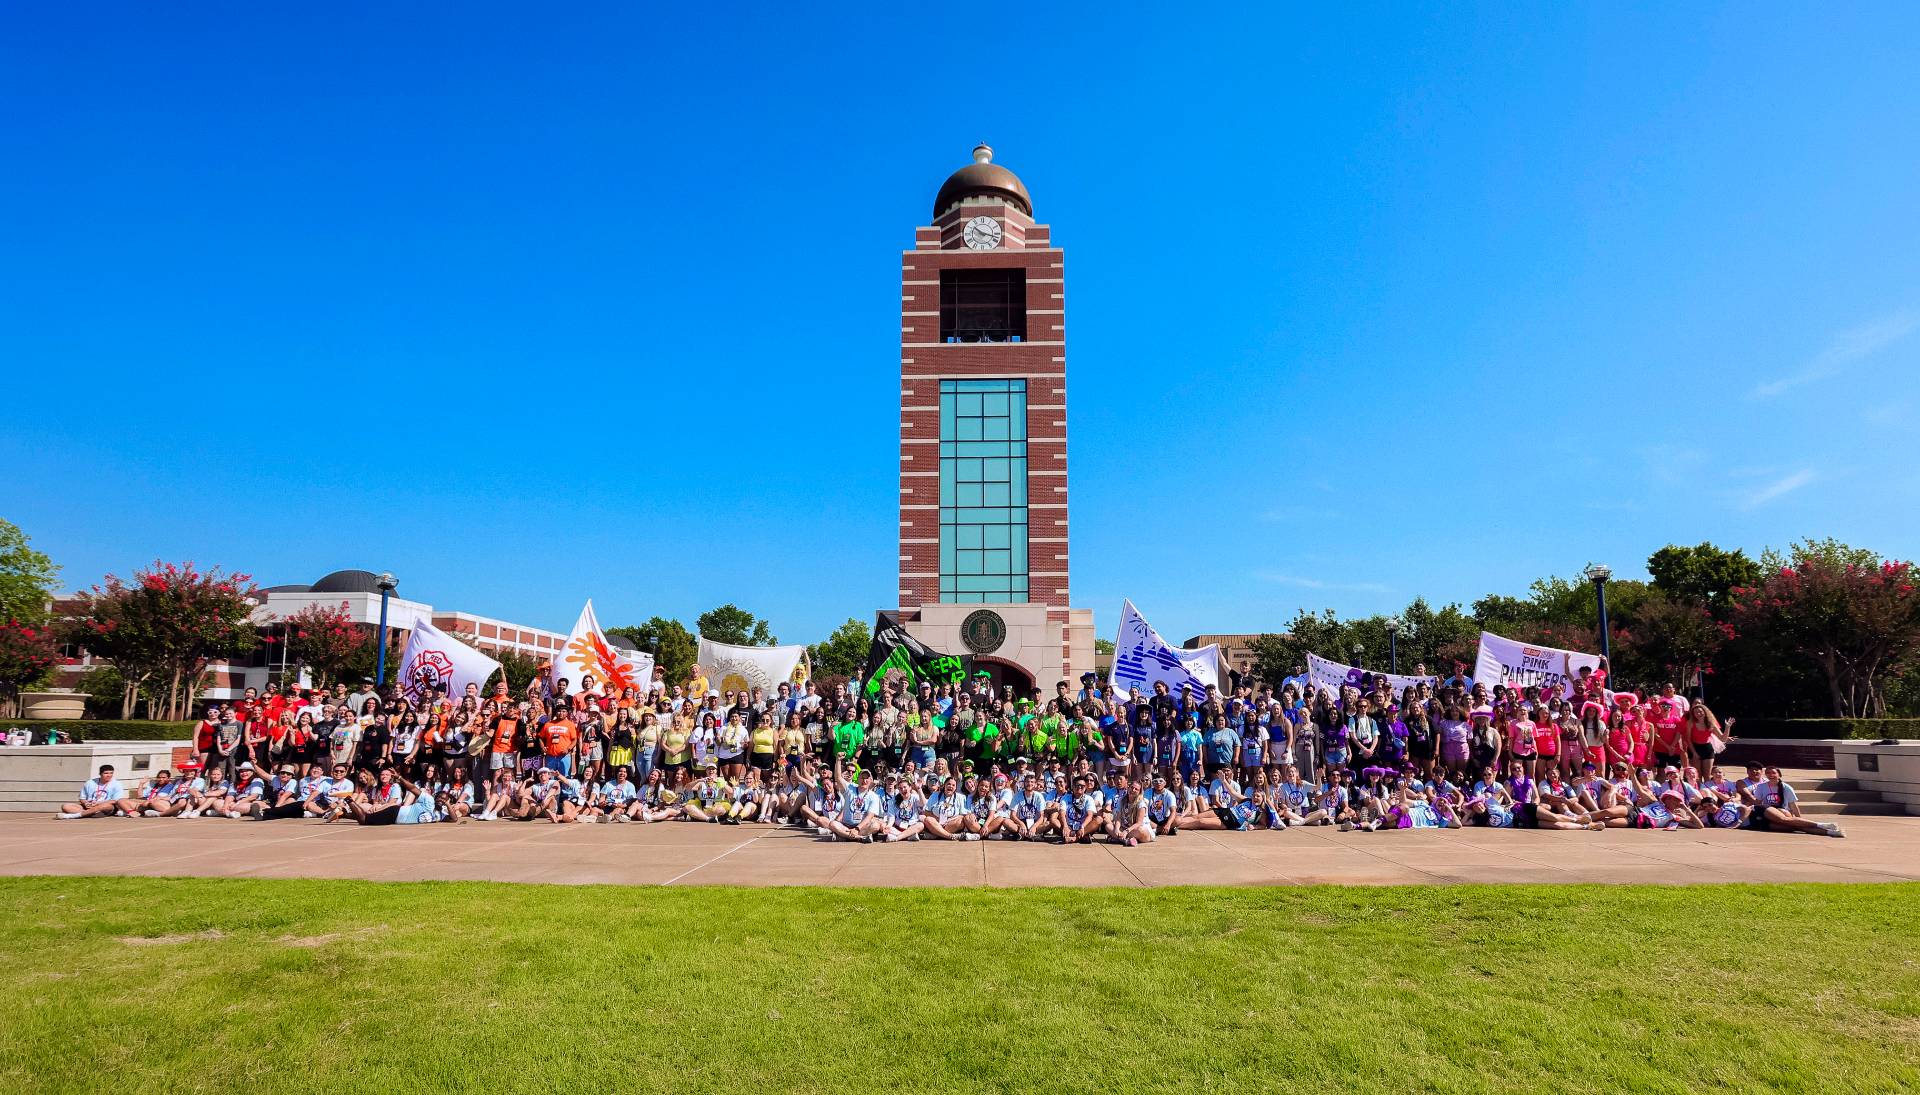 UAFS cub camp students gather under the bell tower